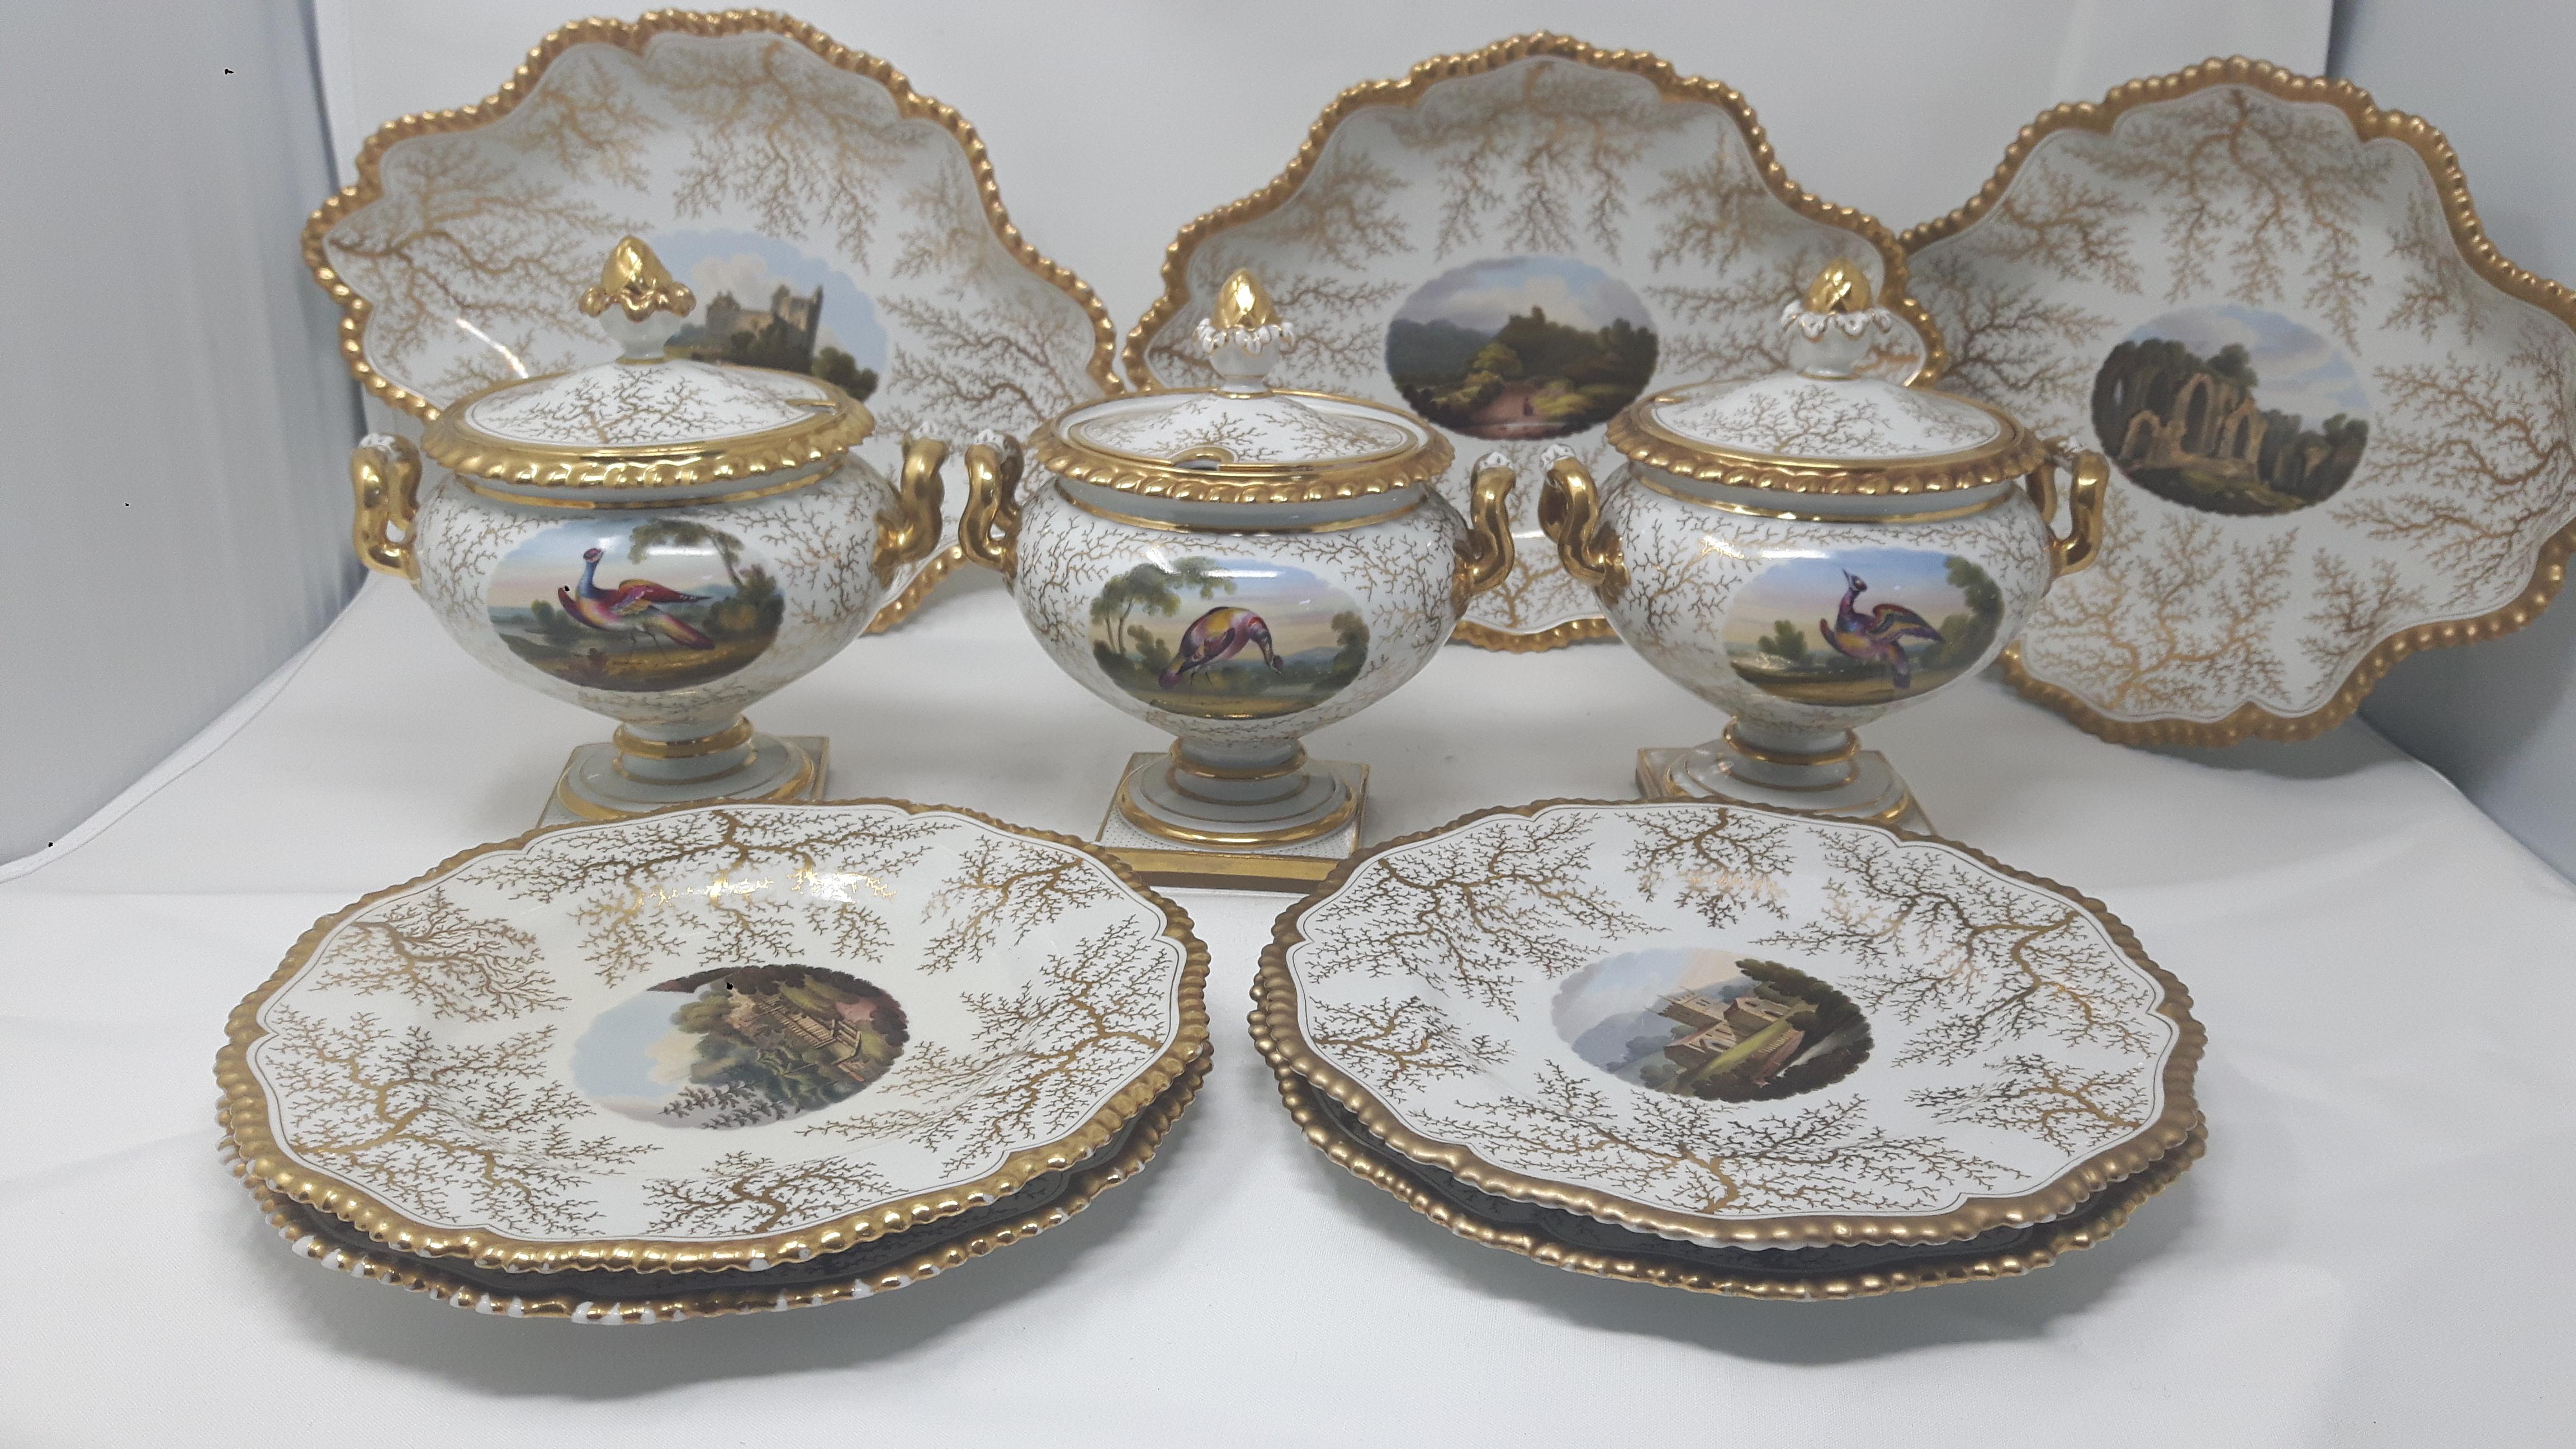 A part dessert service by Worcester, hand-painted on a white background with gilded coral designs surrounding hand-painted cartouches of famous British castles and bird scenes.
English, Coalport Porcelain, circa 1890.